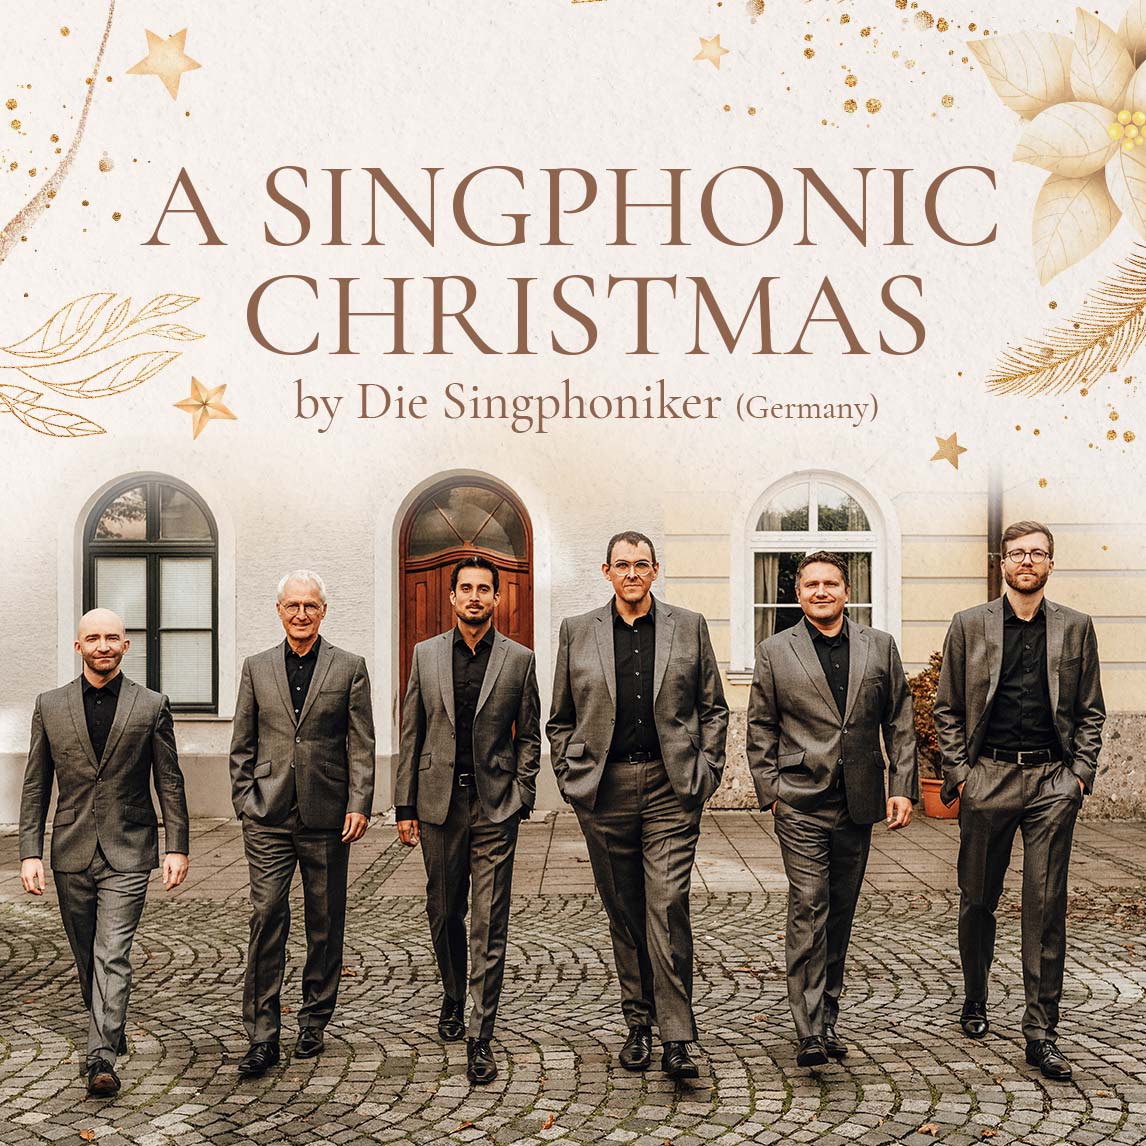 Visual of A Singphonic Christmas by Die Singphoniker